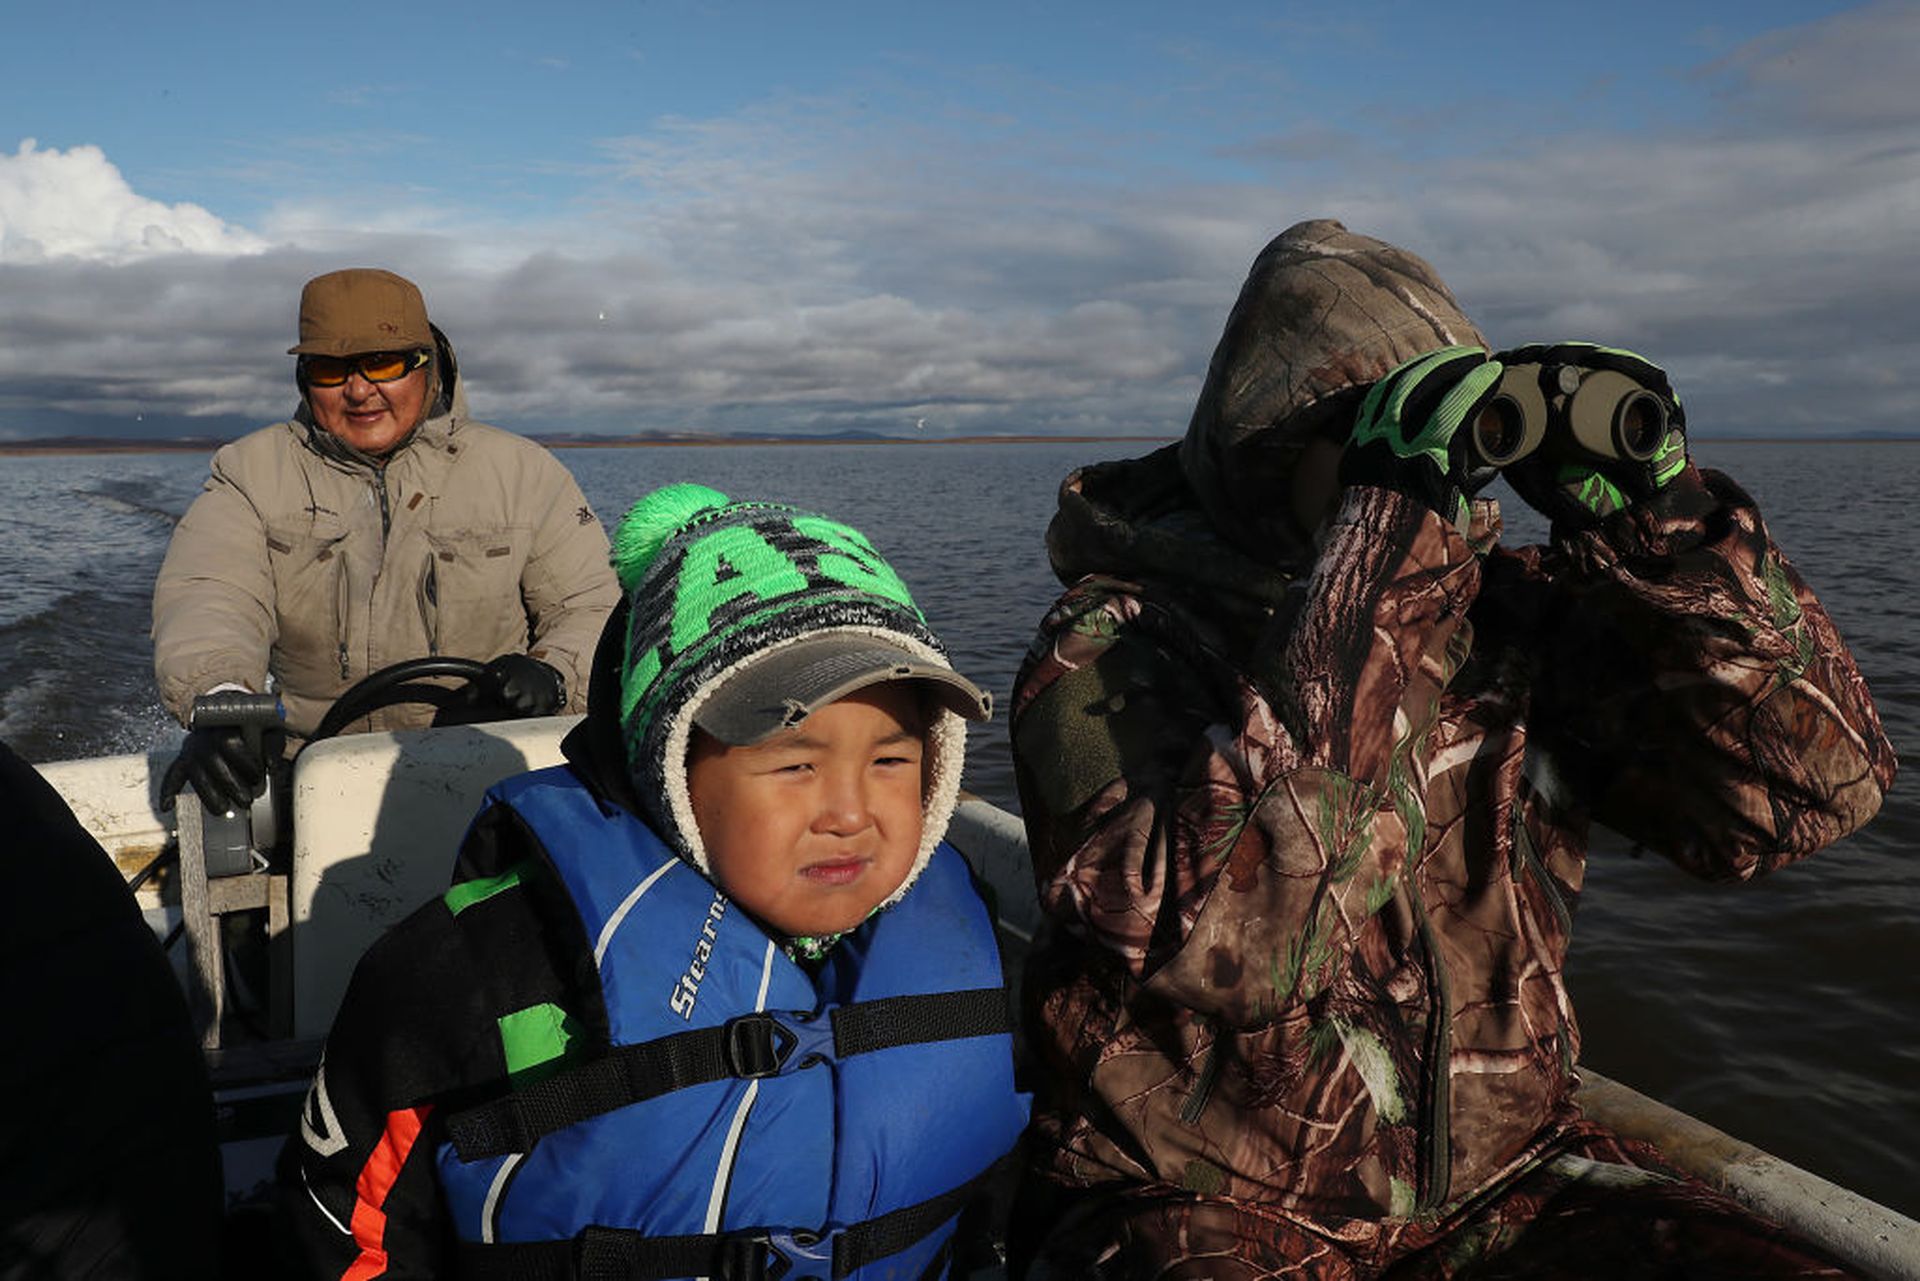 Left to right: Enoch Adams, Lukas Adams and his wife Charlene Adams hunt for caribou from a boat on Sept. 10, 2019, in Kivalina, Alaska. (Photo by Joe Raedle/Getty Images)